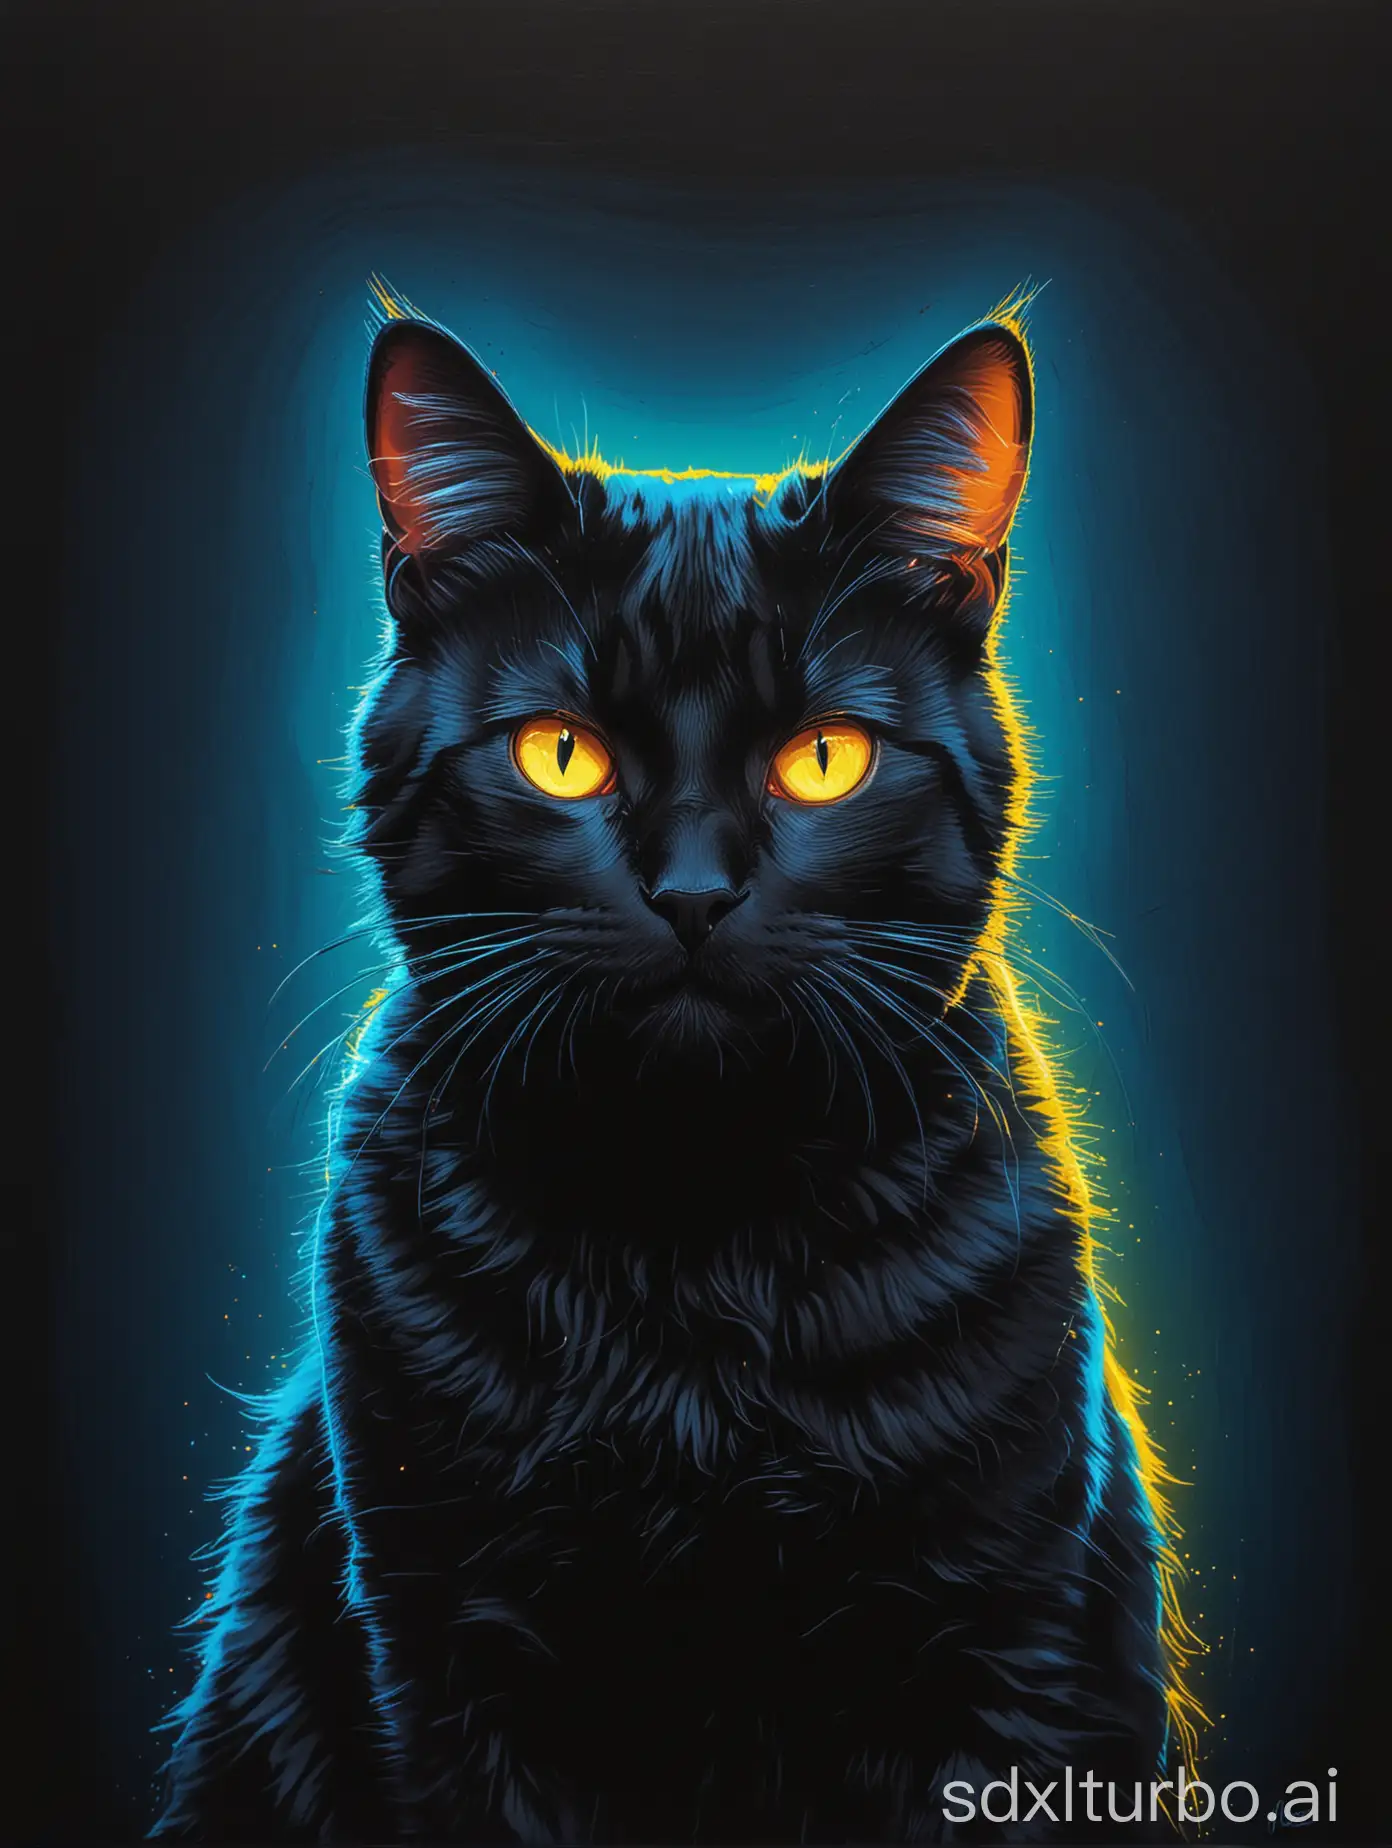 Cat, blue lighting, yellow glow in the background, drawing in the style of contemporary painter, neon colors, black background 